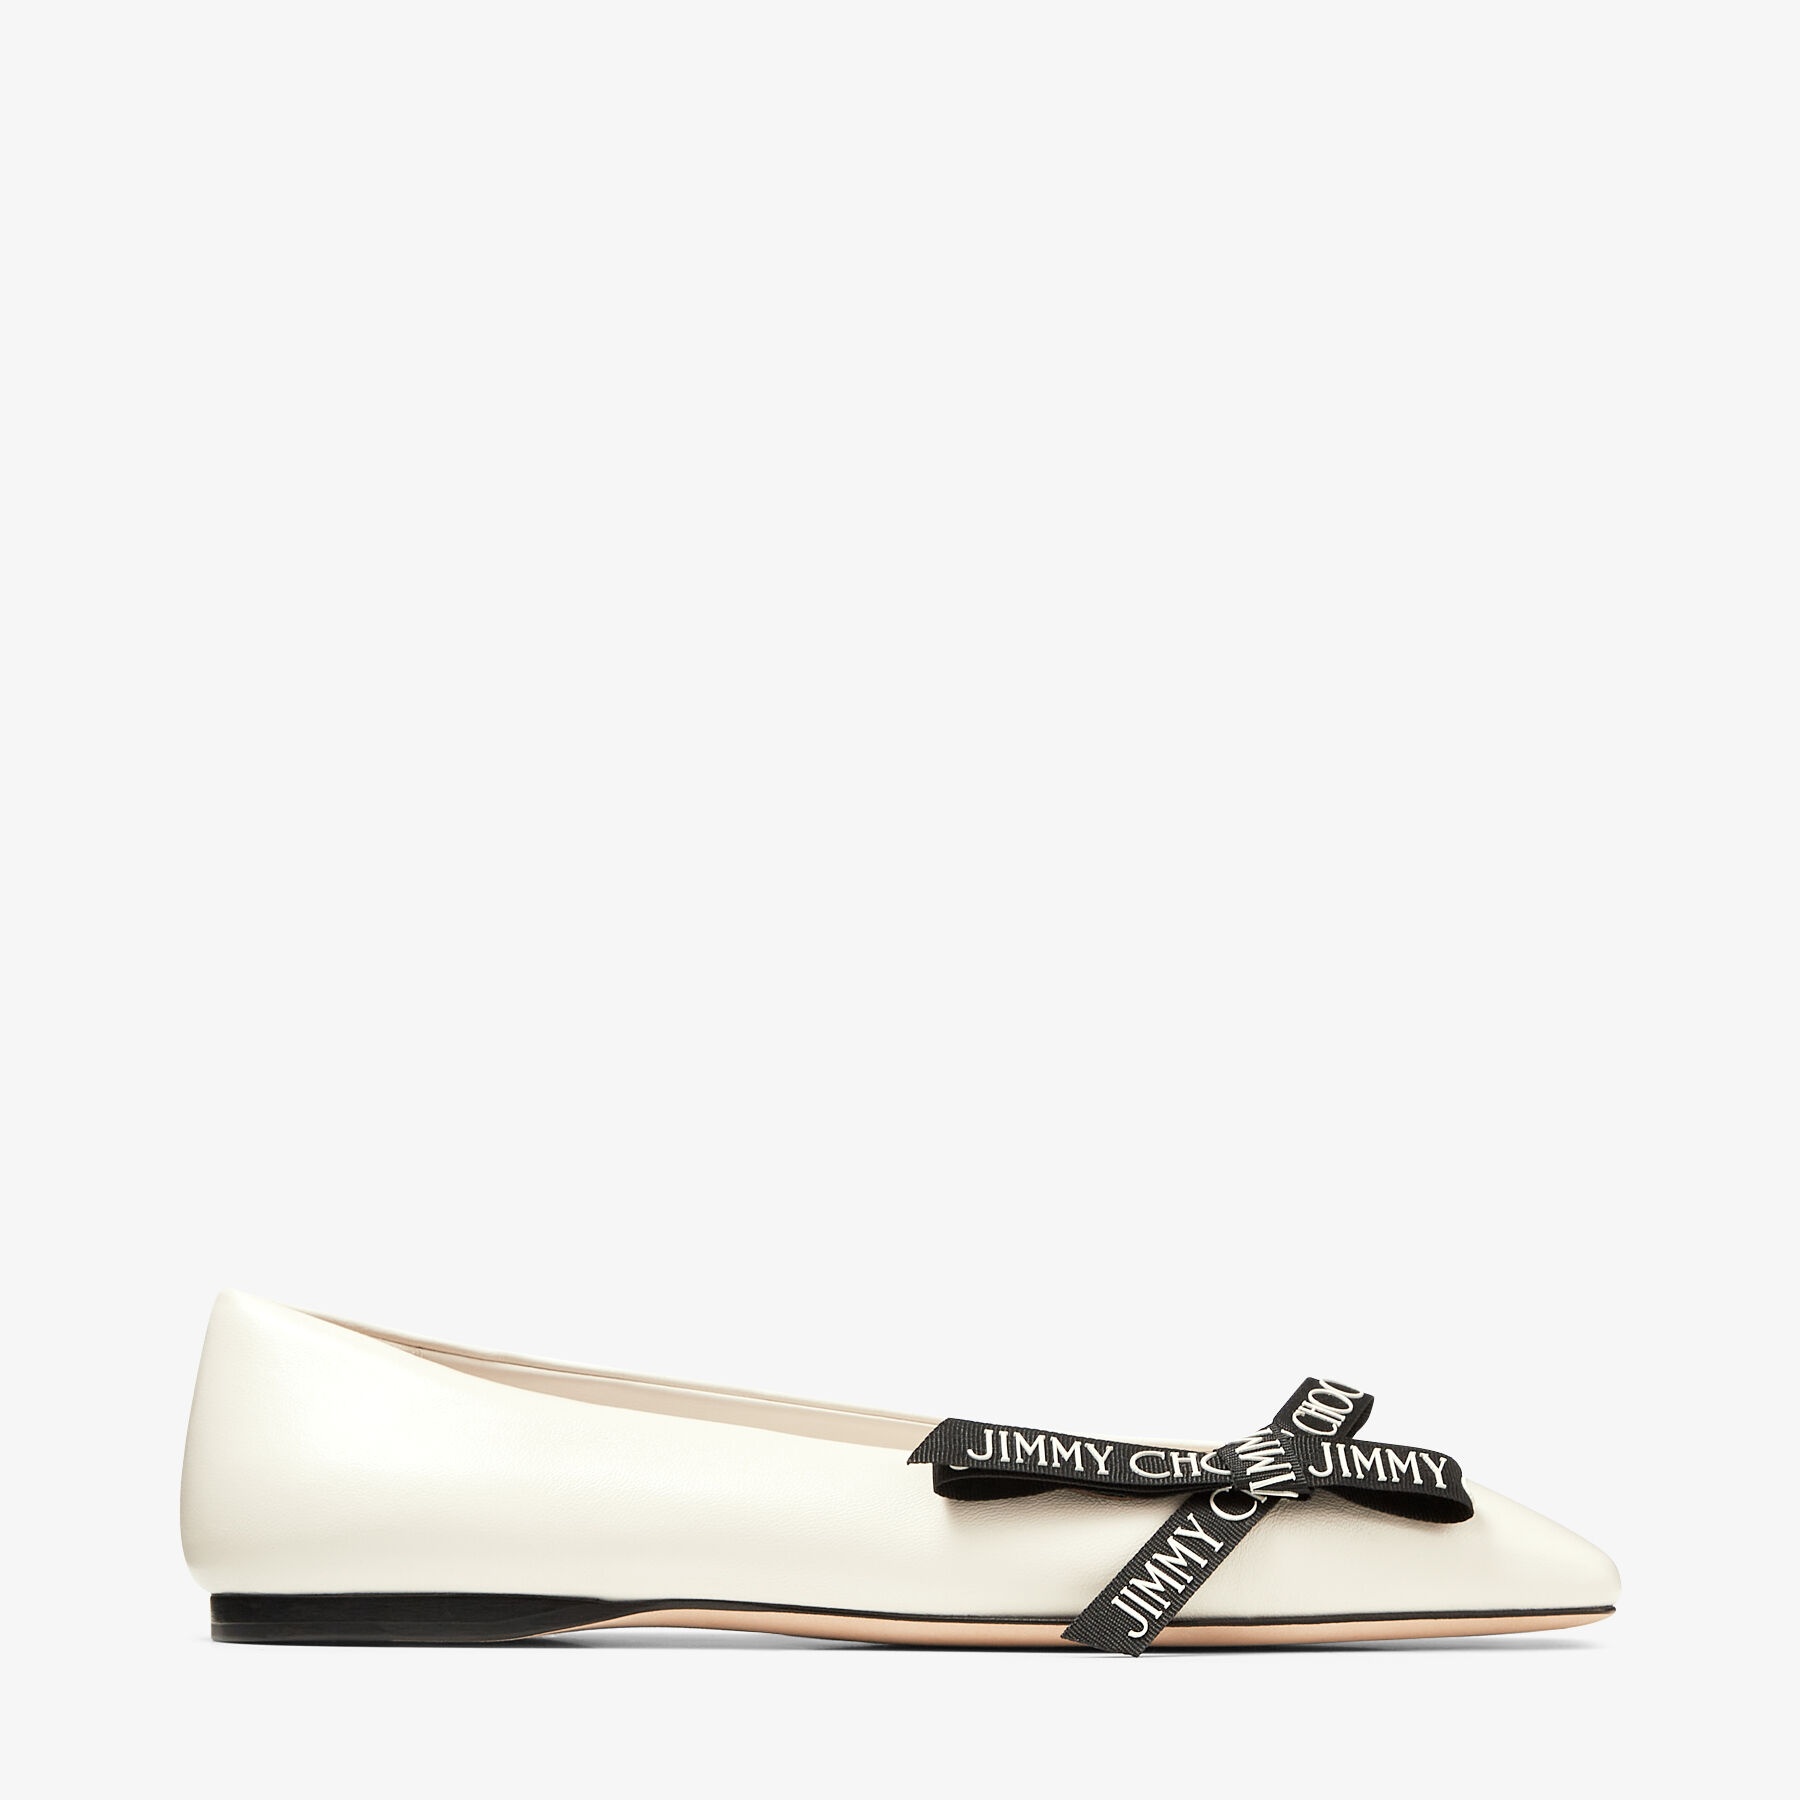 Veda Ballerina
Latte Nappa Leather Flat Ballerina Pumps with Jimmy Choo Bow - 1